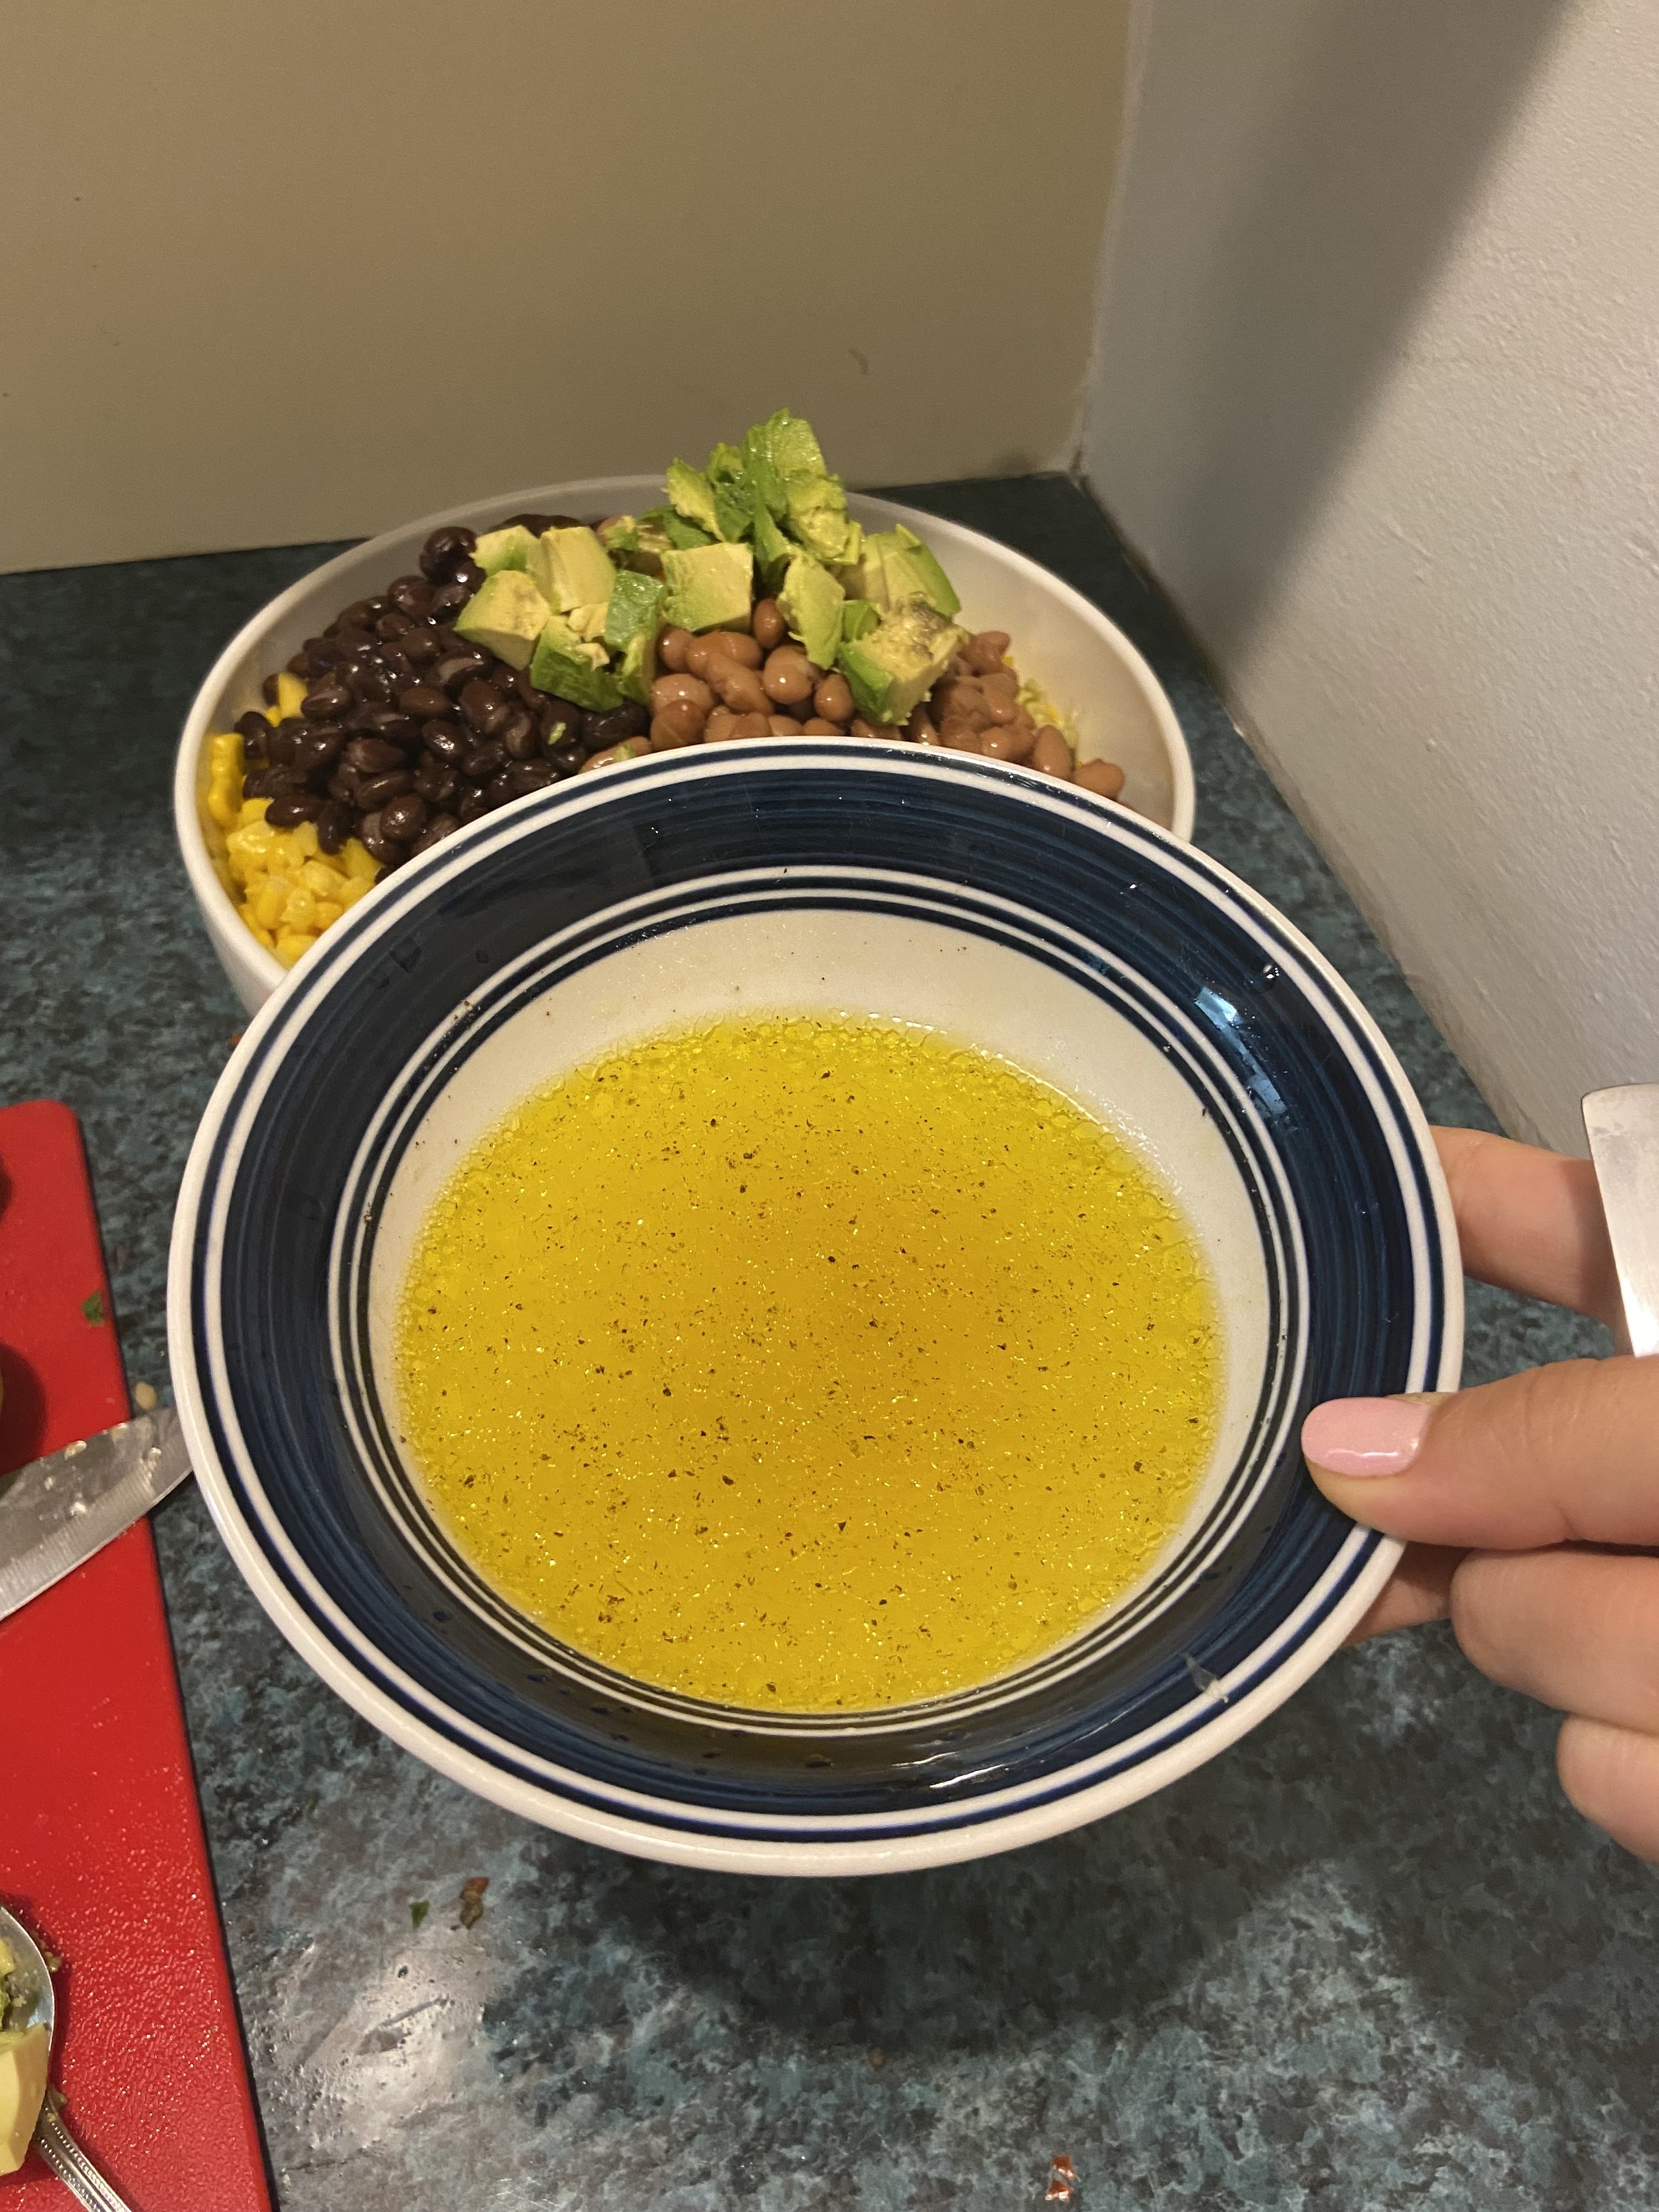 A bowl of home-made dressing for the dish